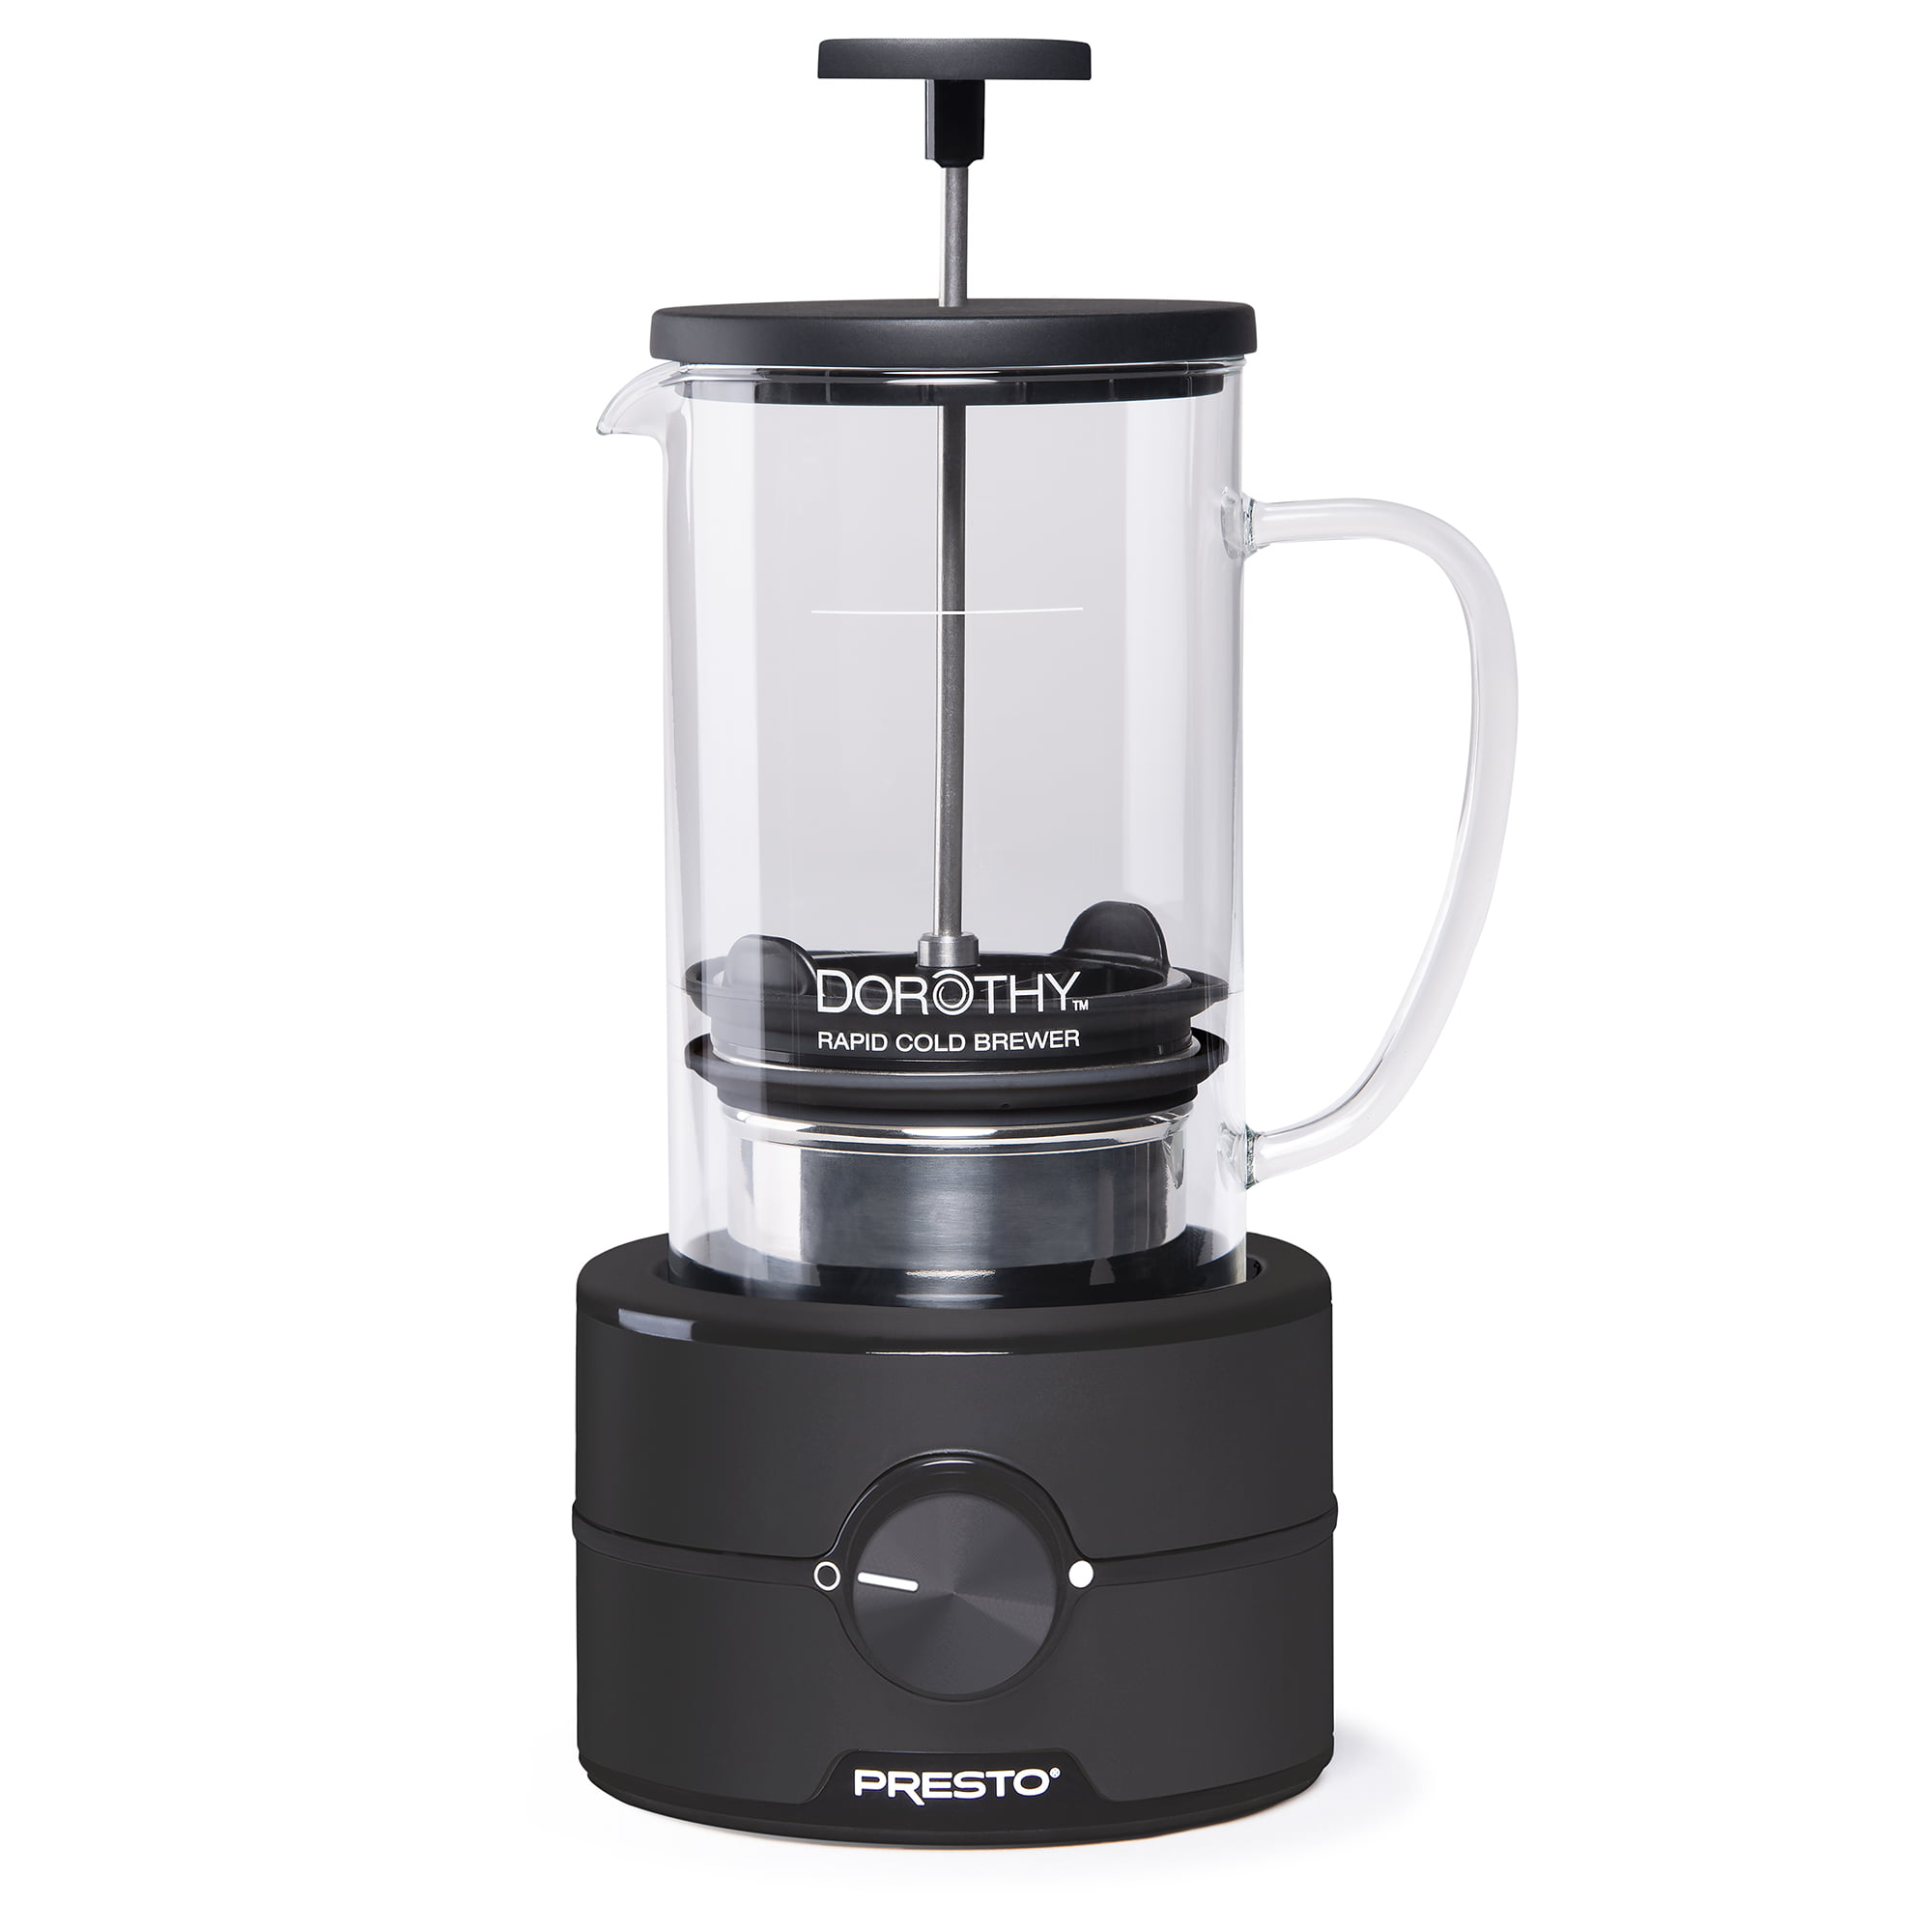 Presto 02937 Dorothy™ Electric Rapid Cold Brewer - Cold brew at home i –  The Curiosity Cafe